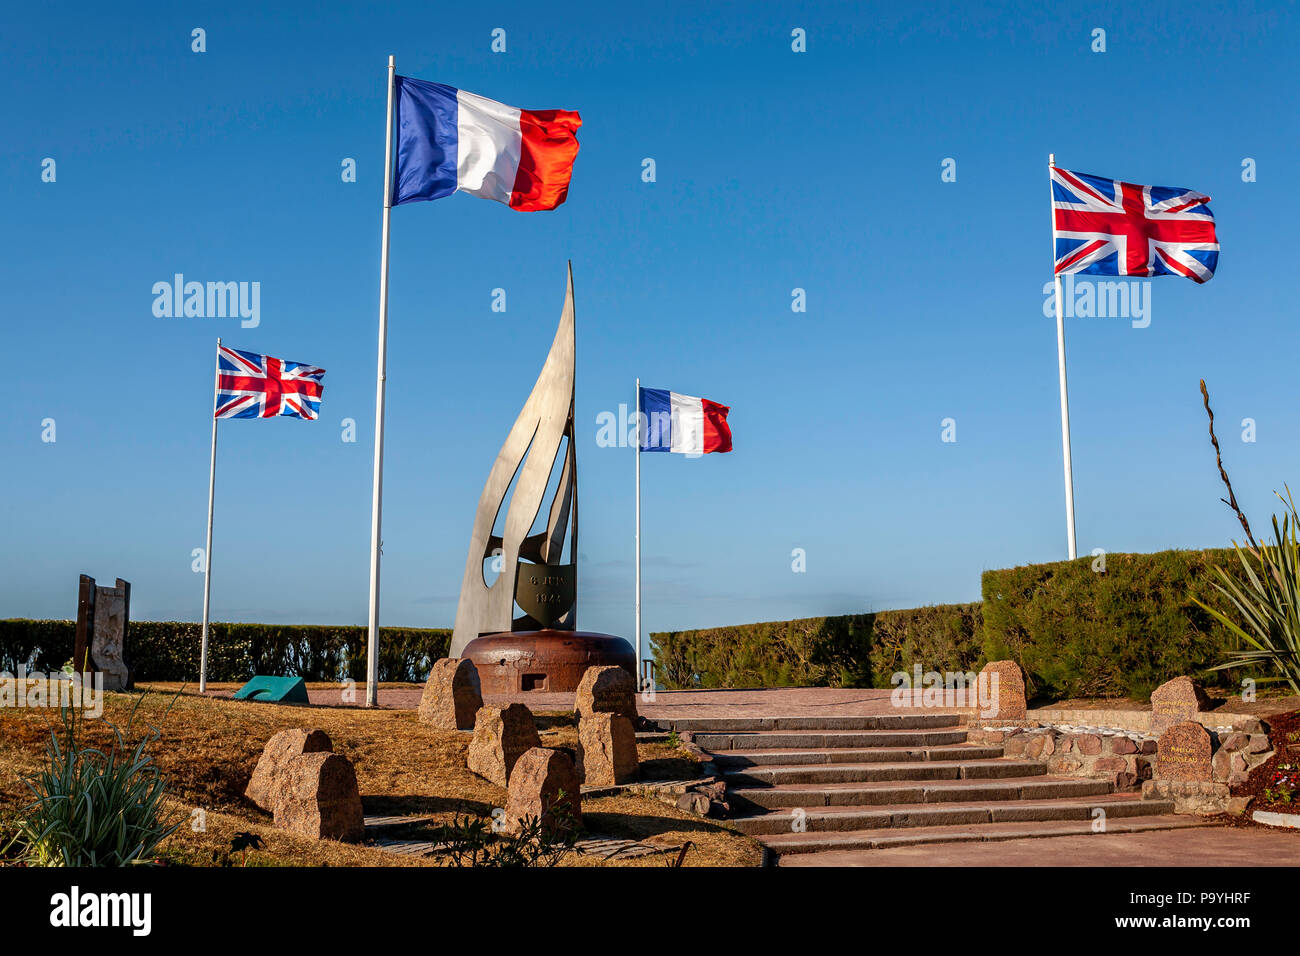 Memorial sculpture to the fallen heroes of 6 June 1944 at Sword beach Normandy France Stock Photo